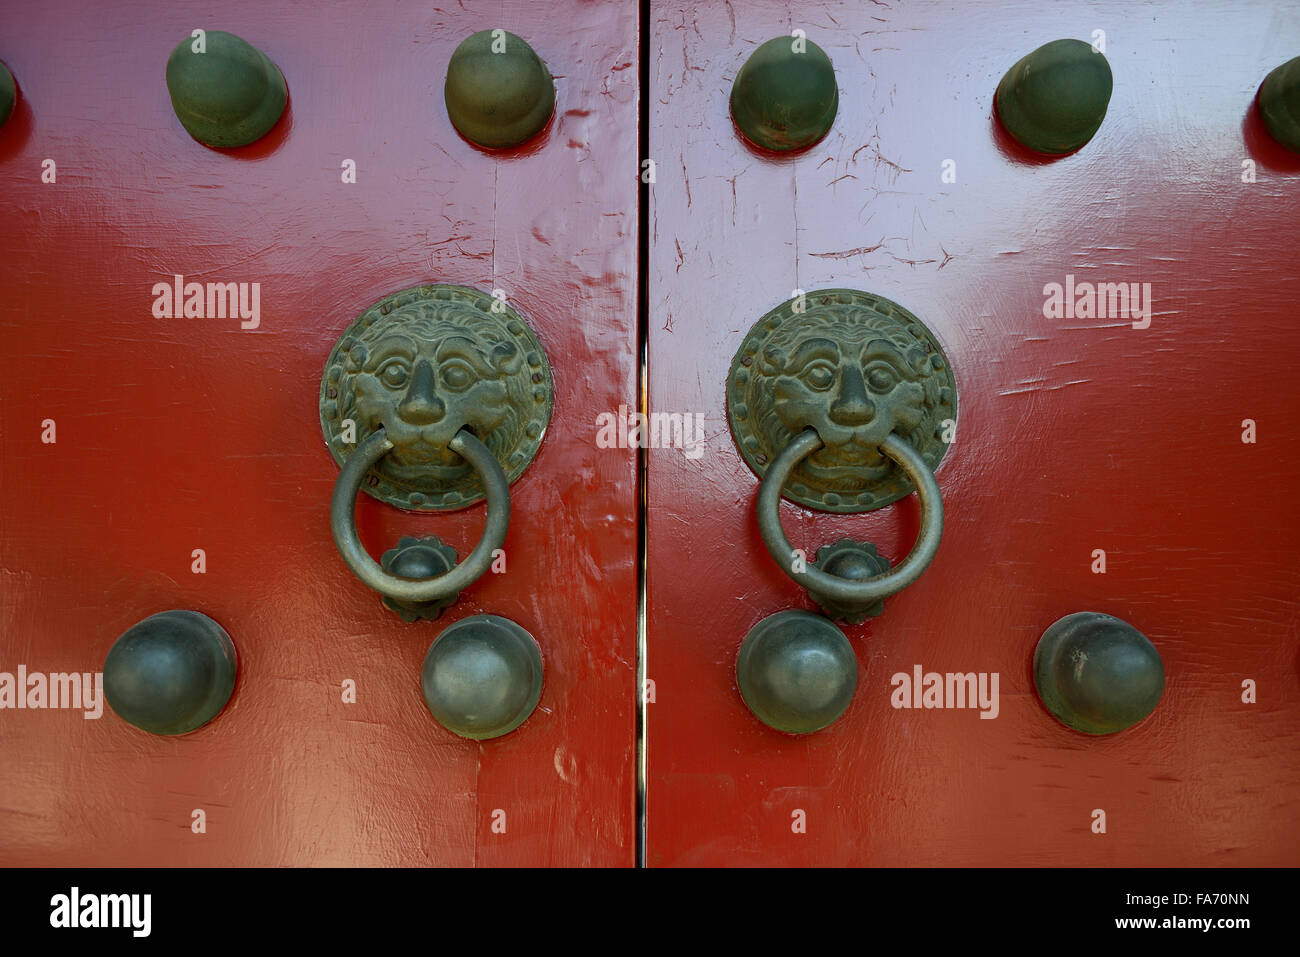 Door,Asia,Culture,Entrance,Palace,Knob,Ornate,Rusty,Mythology,Handle,History,Old,Ancient, Antiquities,Dragon,Chinese Culture Stock Photo